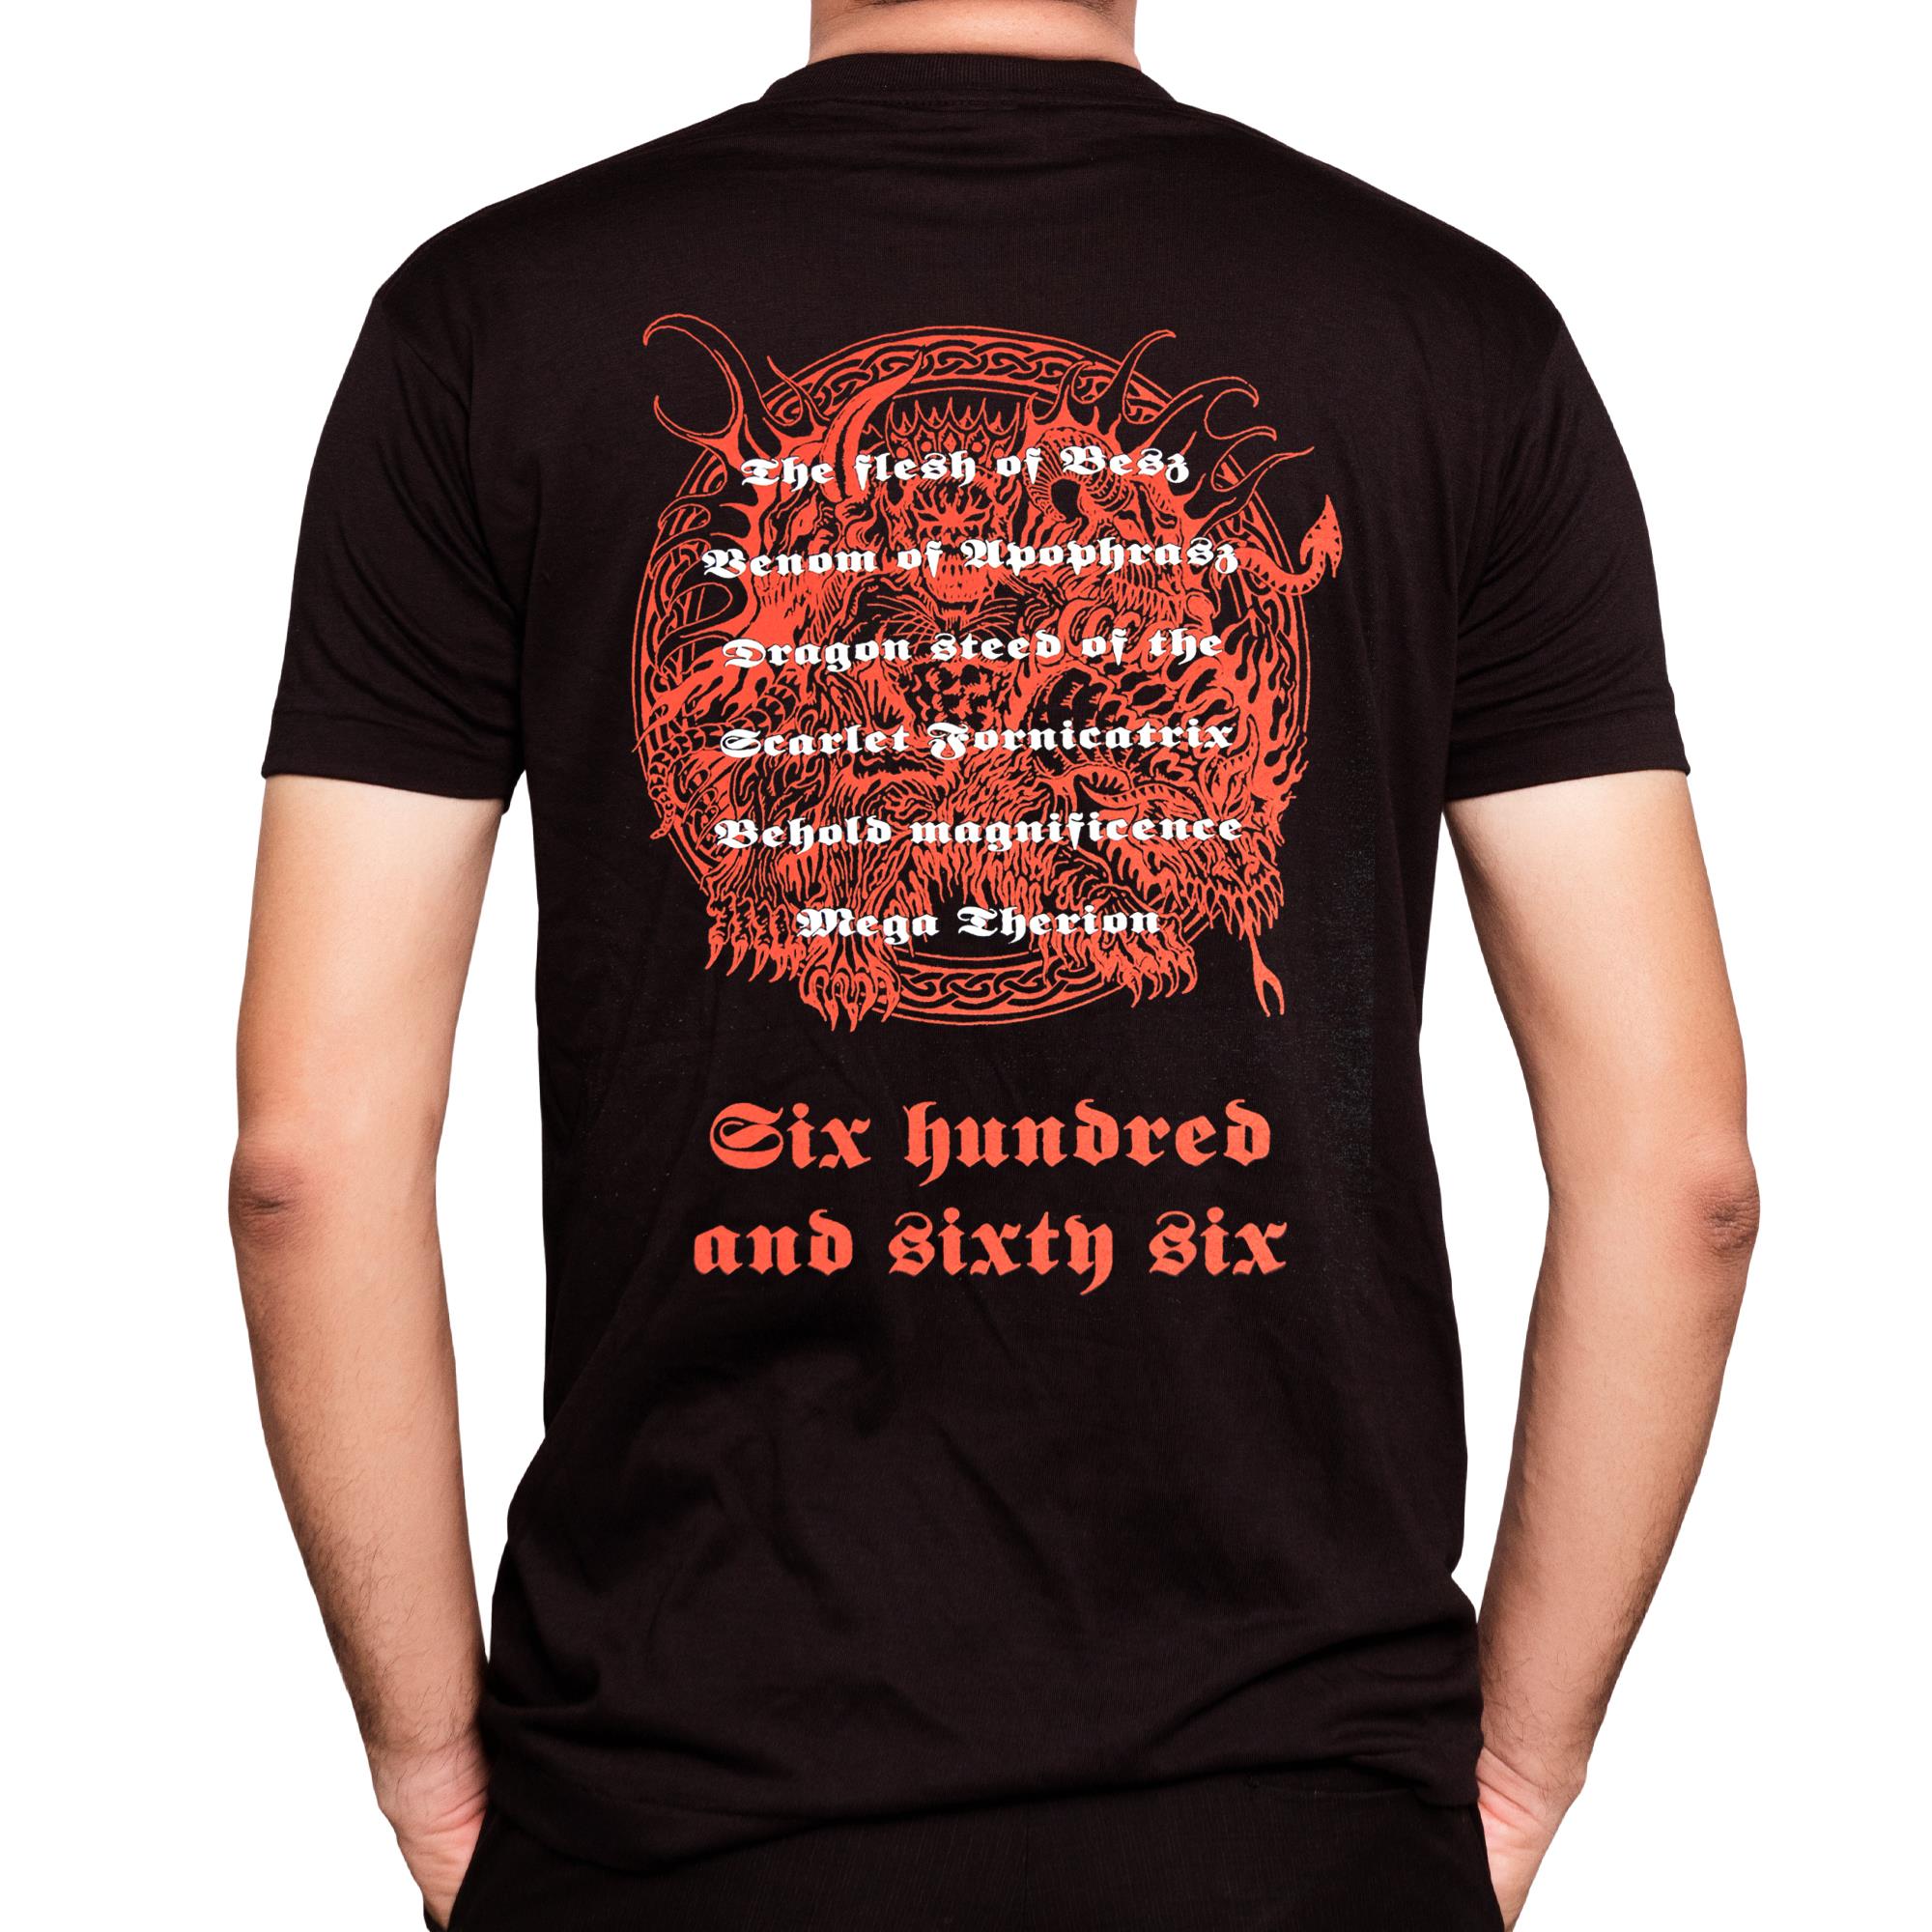 The Inexorable T-Shirt